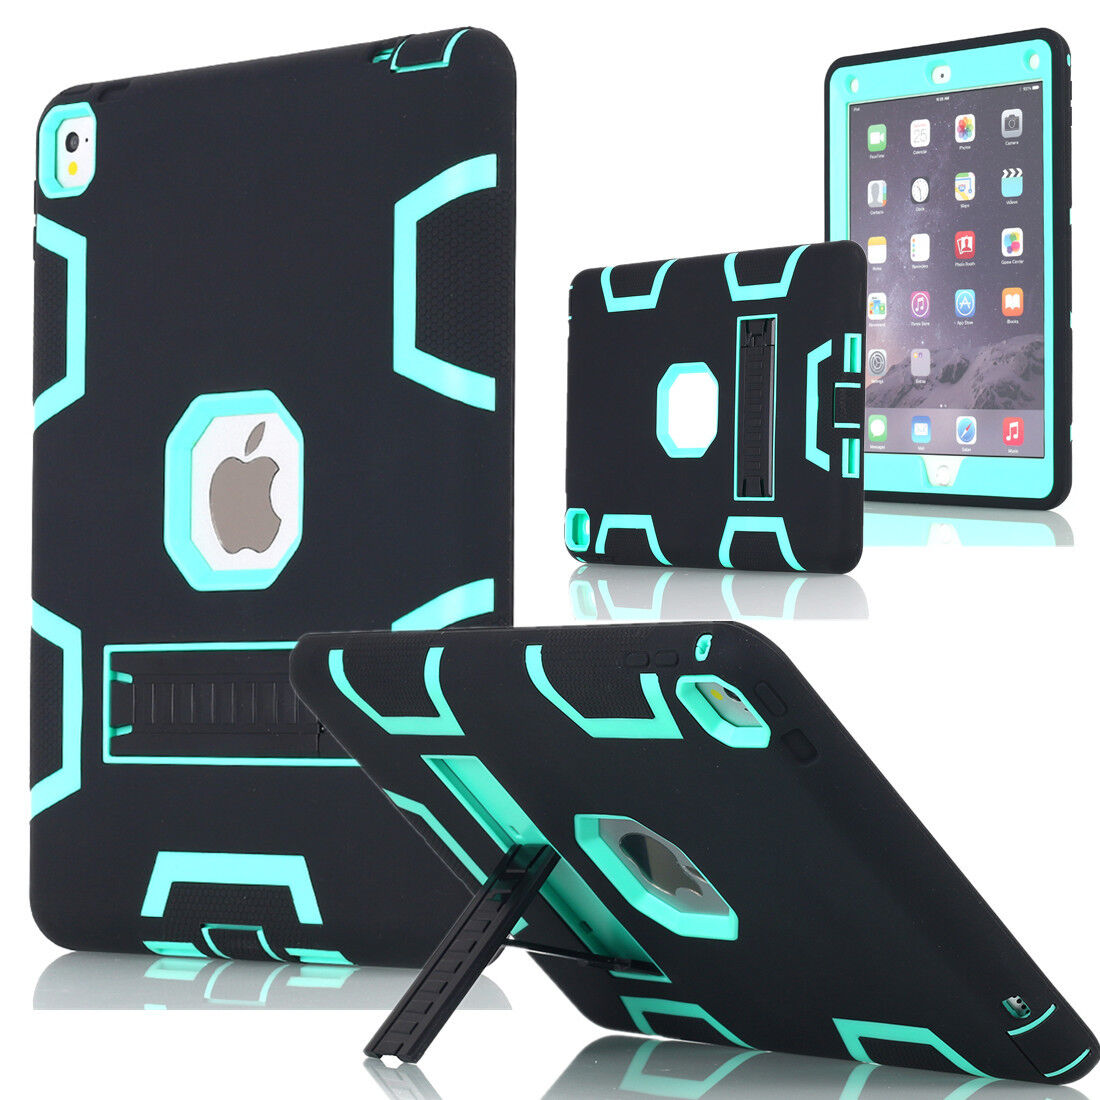 Hybrid Heavy Duty Shockproof Kickstand Case Cover For iPad Pro 12.9\